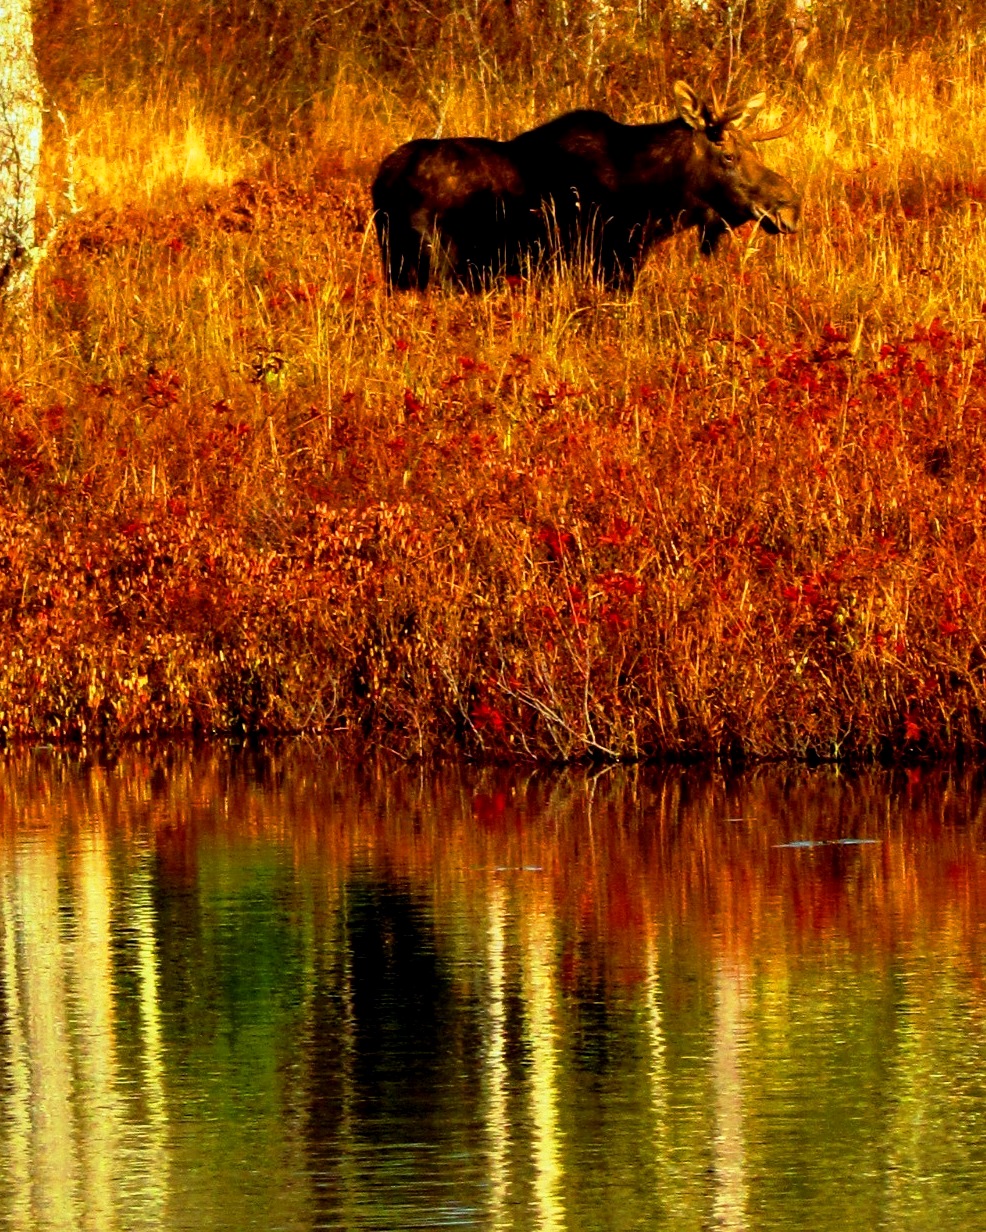 Early Encounter with Moose in Autumn (user submitted)